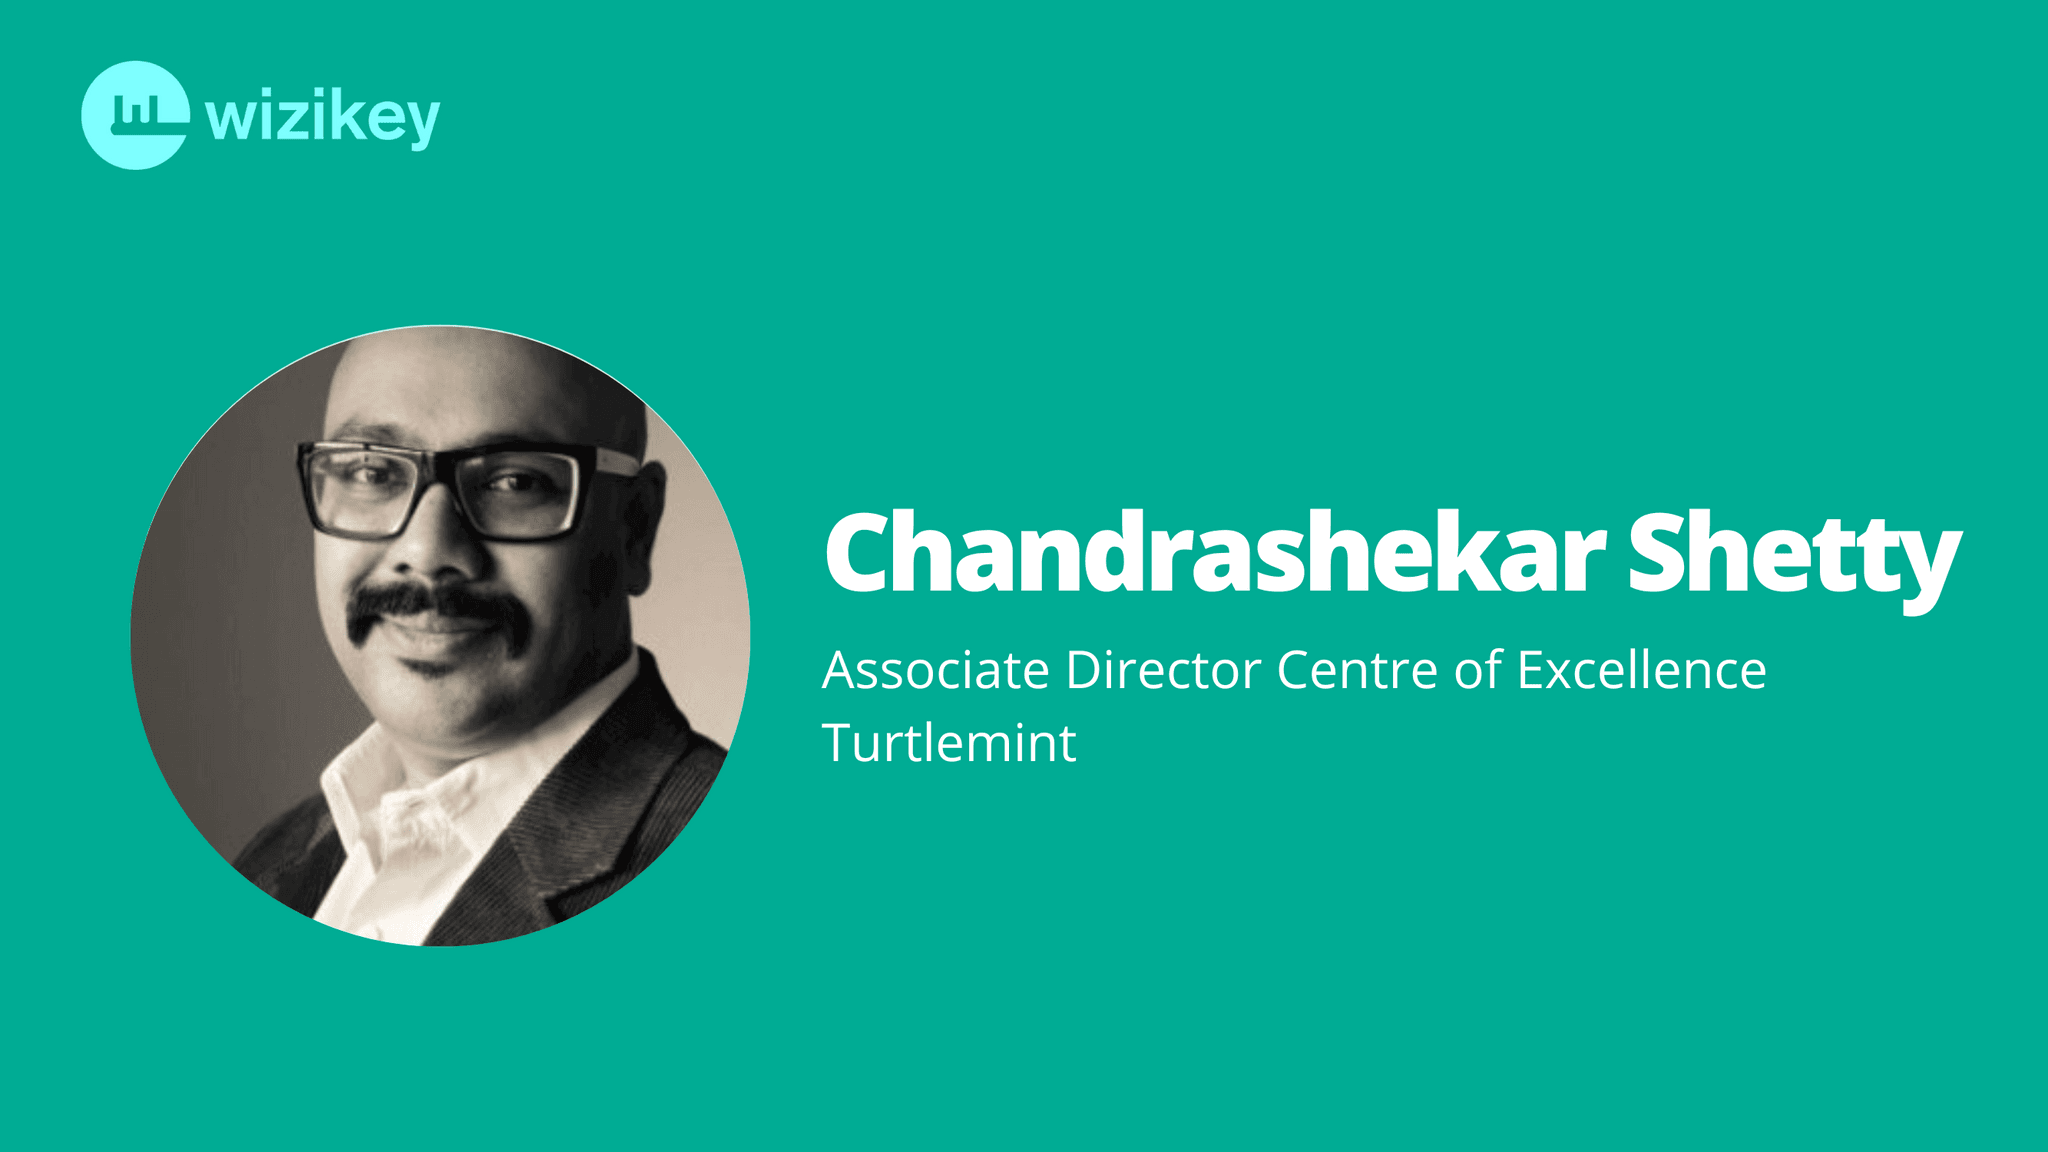 Data and Communications are so well bound together you can’t really work without either: Chandrashaker from Turtlemint